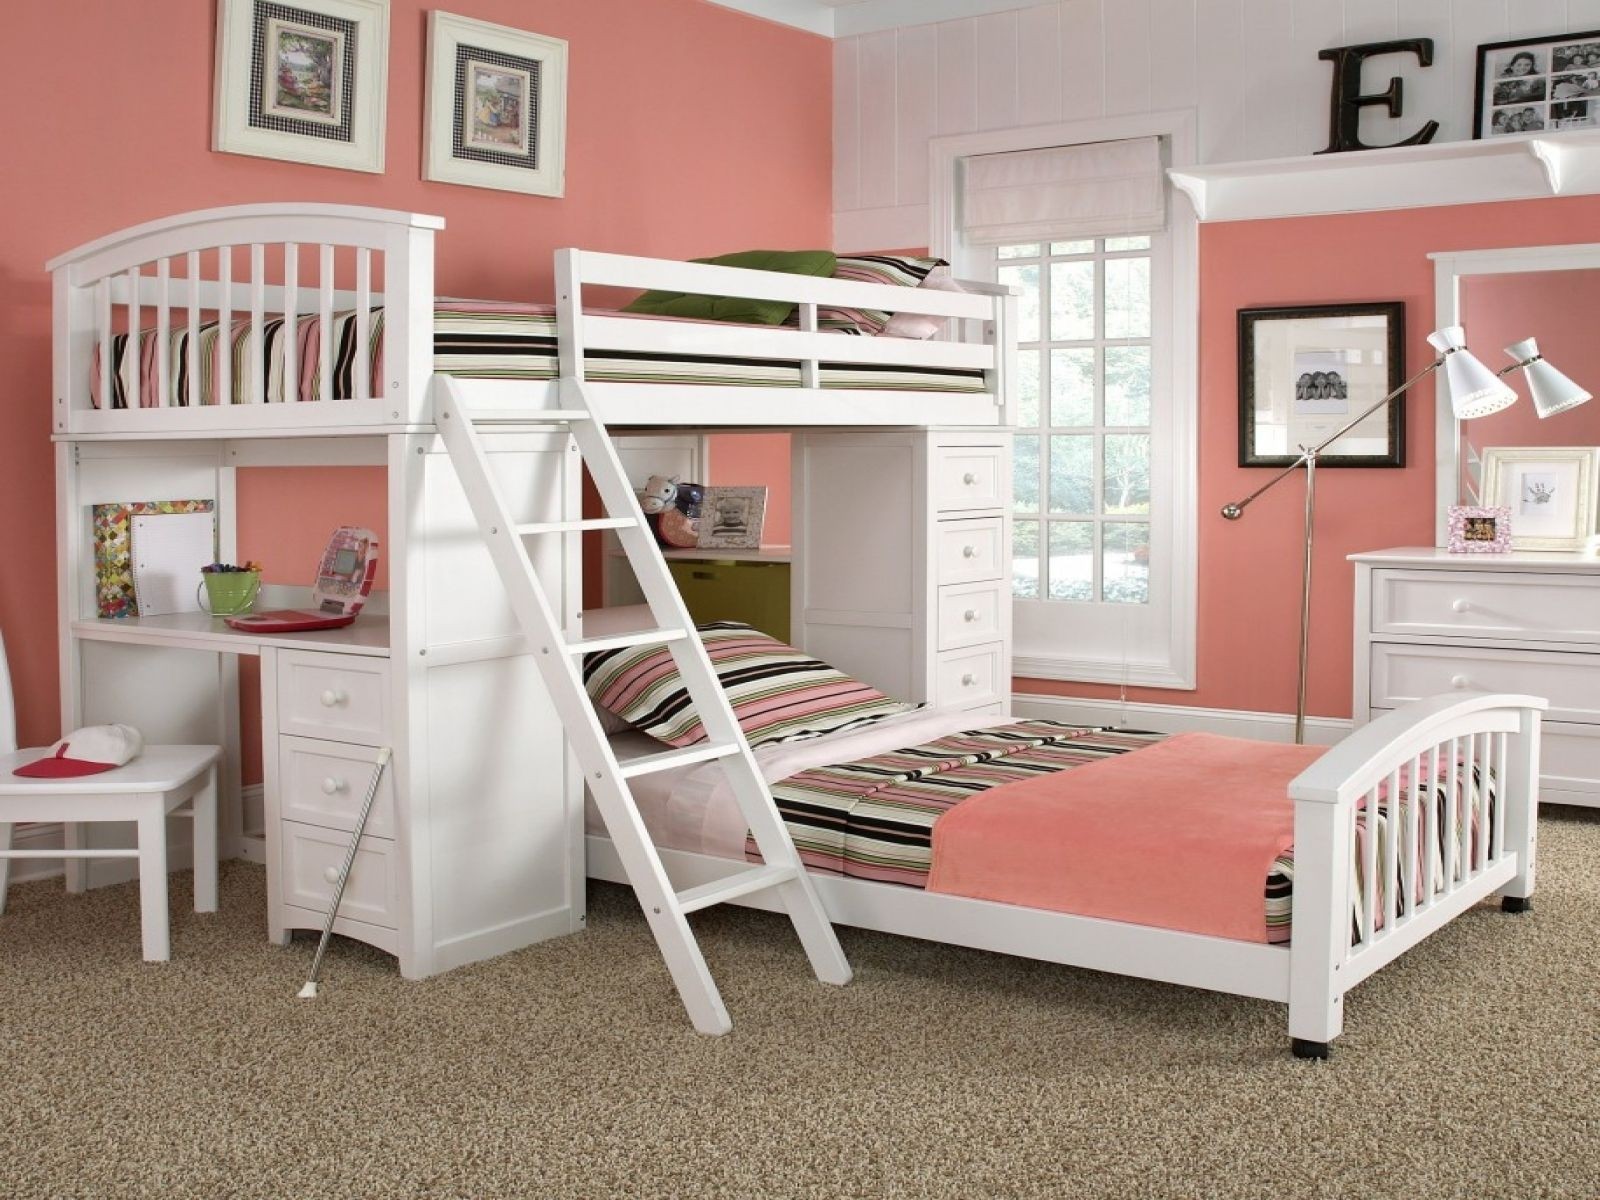 Tween bedroom ideas and tips you have to try immediately